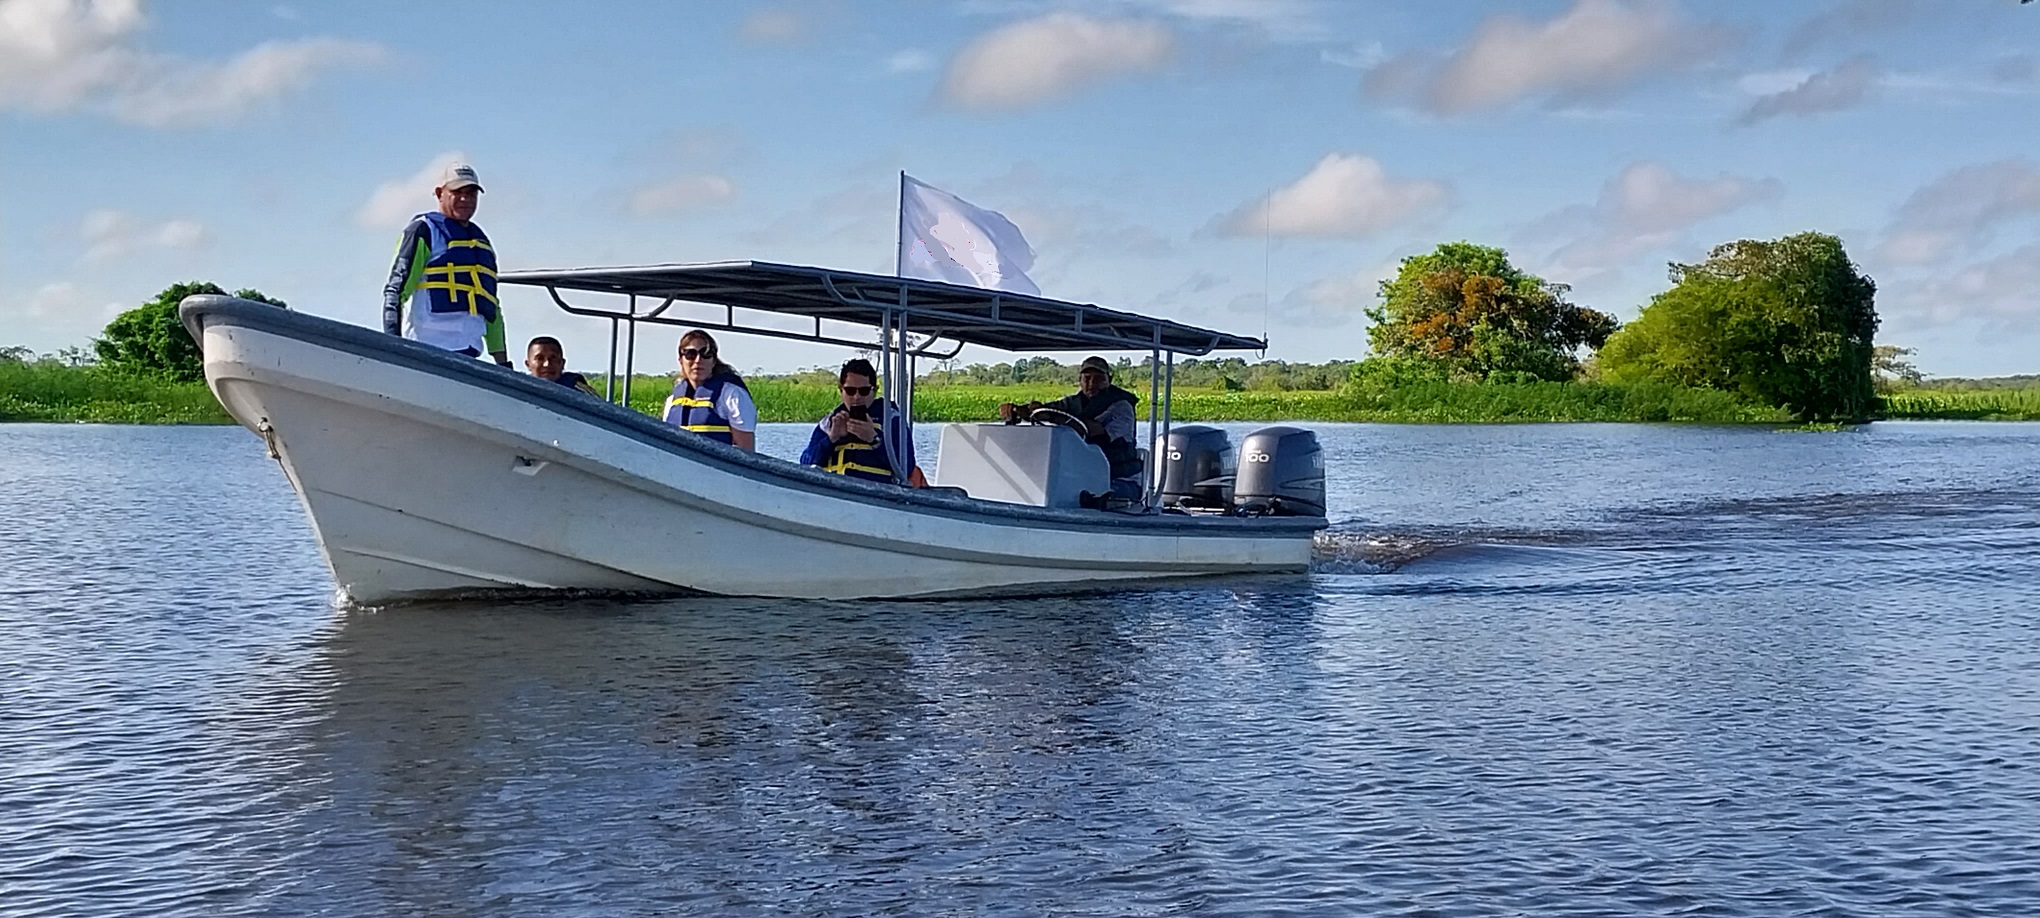 Long distances across the Delta require fast boats with two 200Hp engines to reach remote destinations